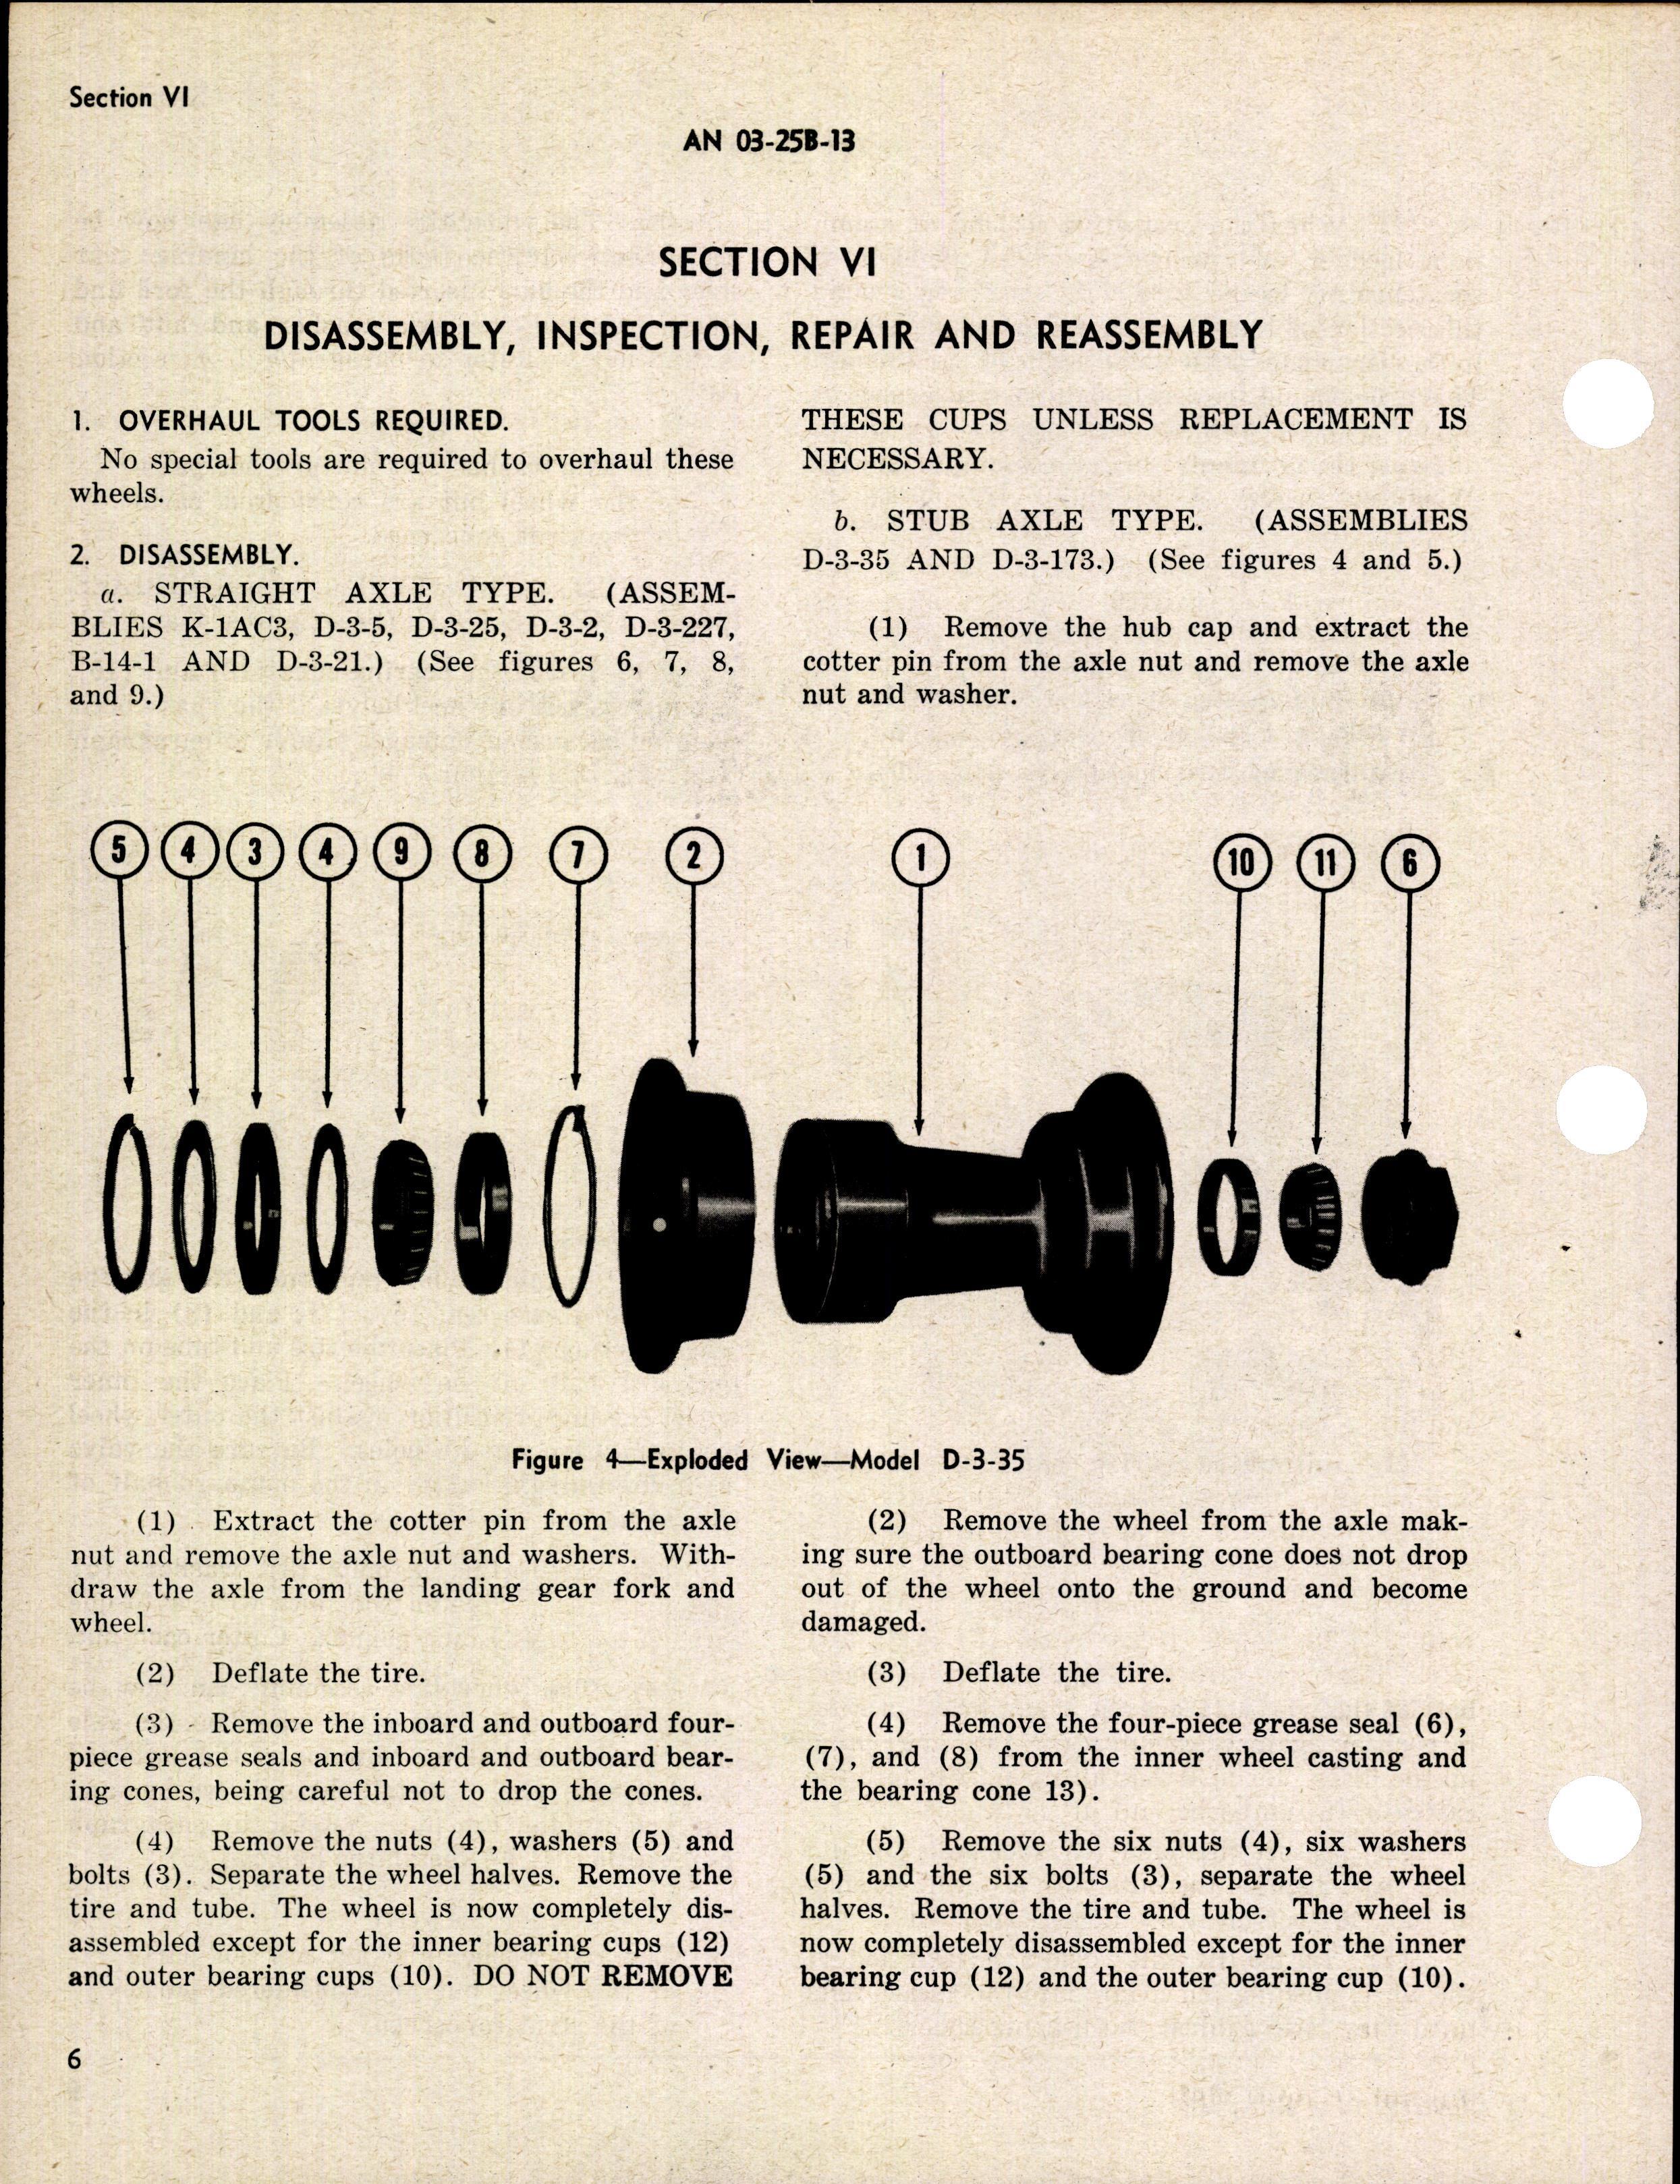 Sample page 4 from AirCorps Library document: Operation, Service, & Overhaul Instructions with Parts Catalog for Low Pressure Tail Wheels